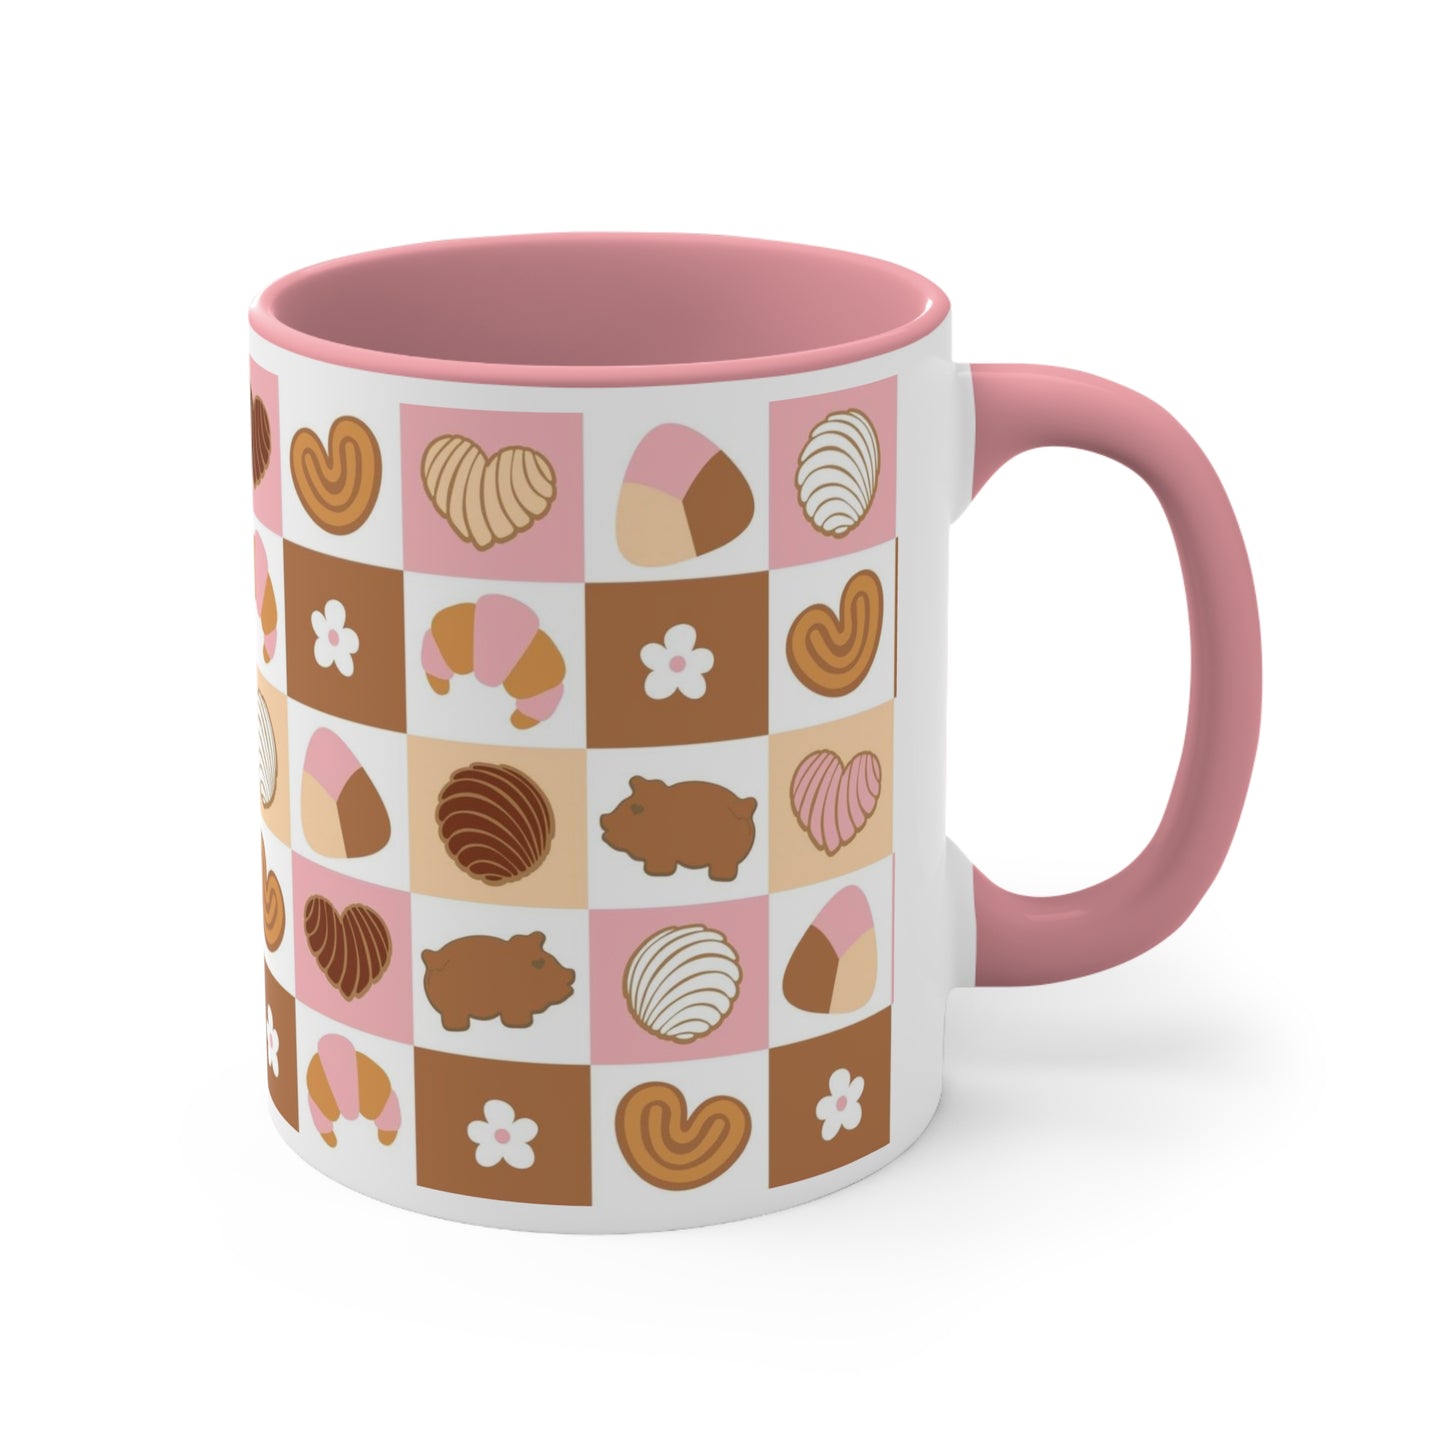 checkered Pan dulce Coffee Mug, 11oz for Latin family or Mexican friend. Mexican mug for her.